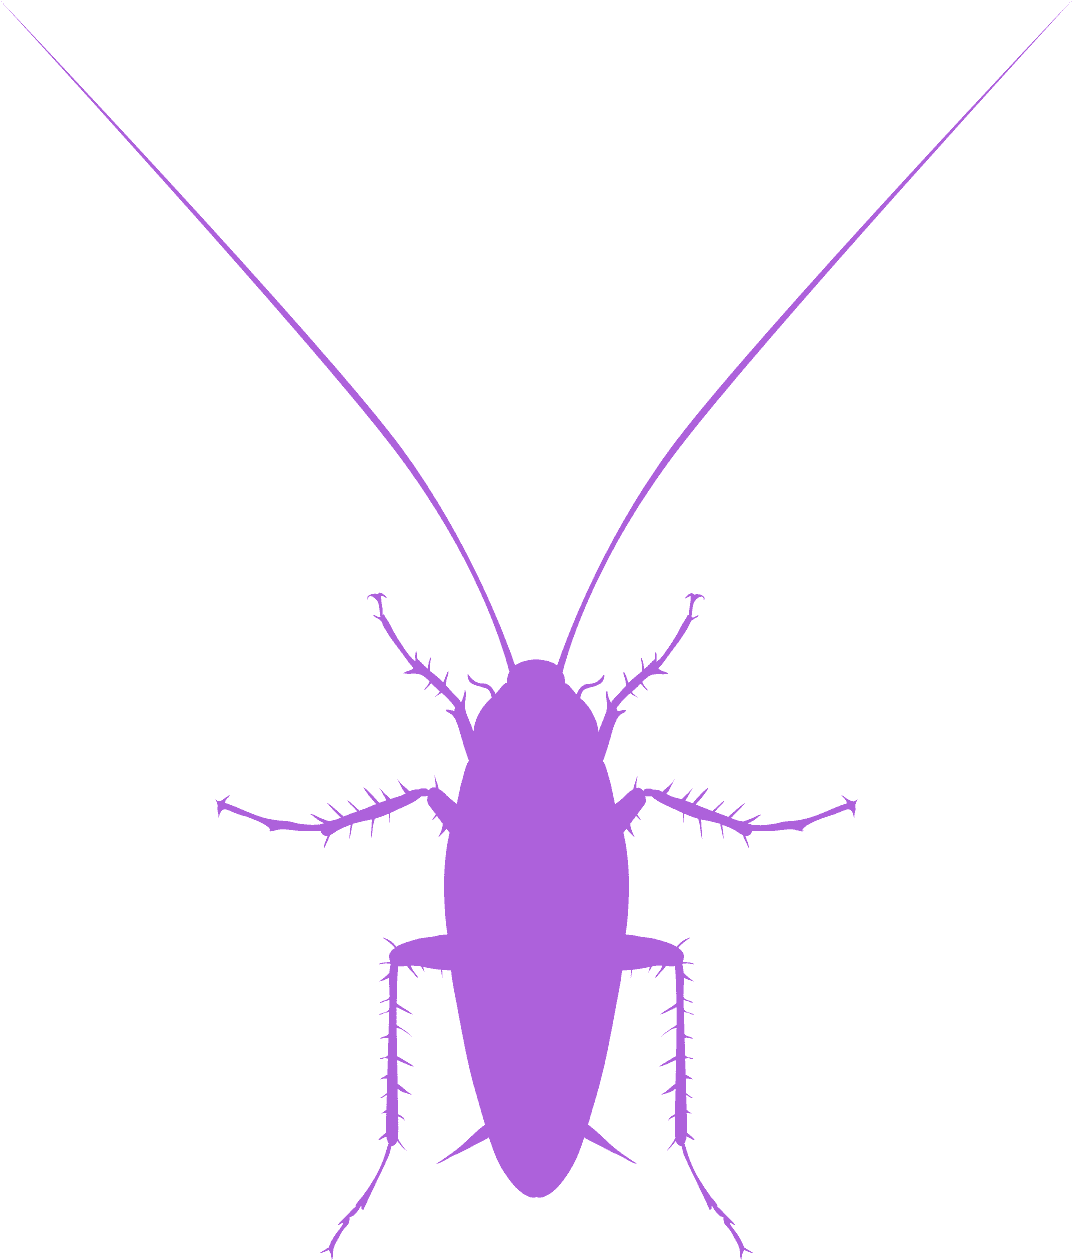 Cockroach Silhouette Graphic PNG